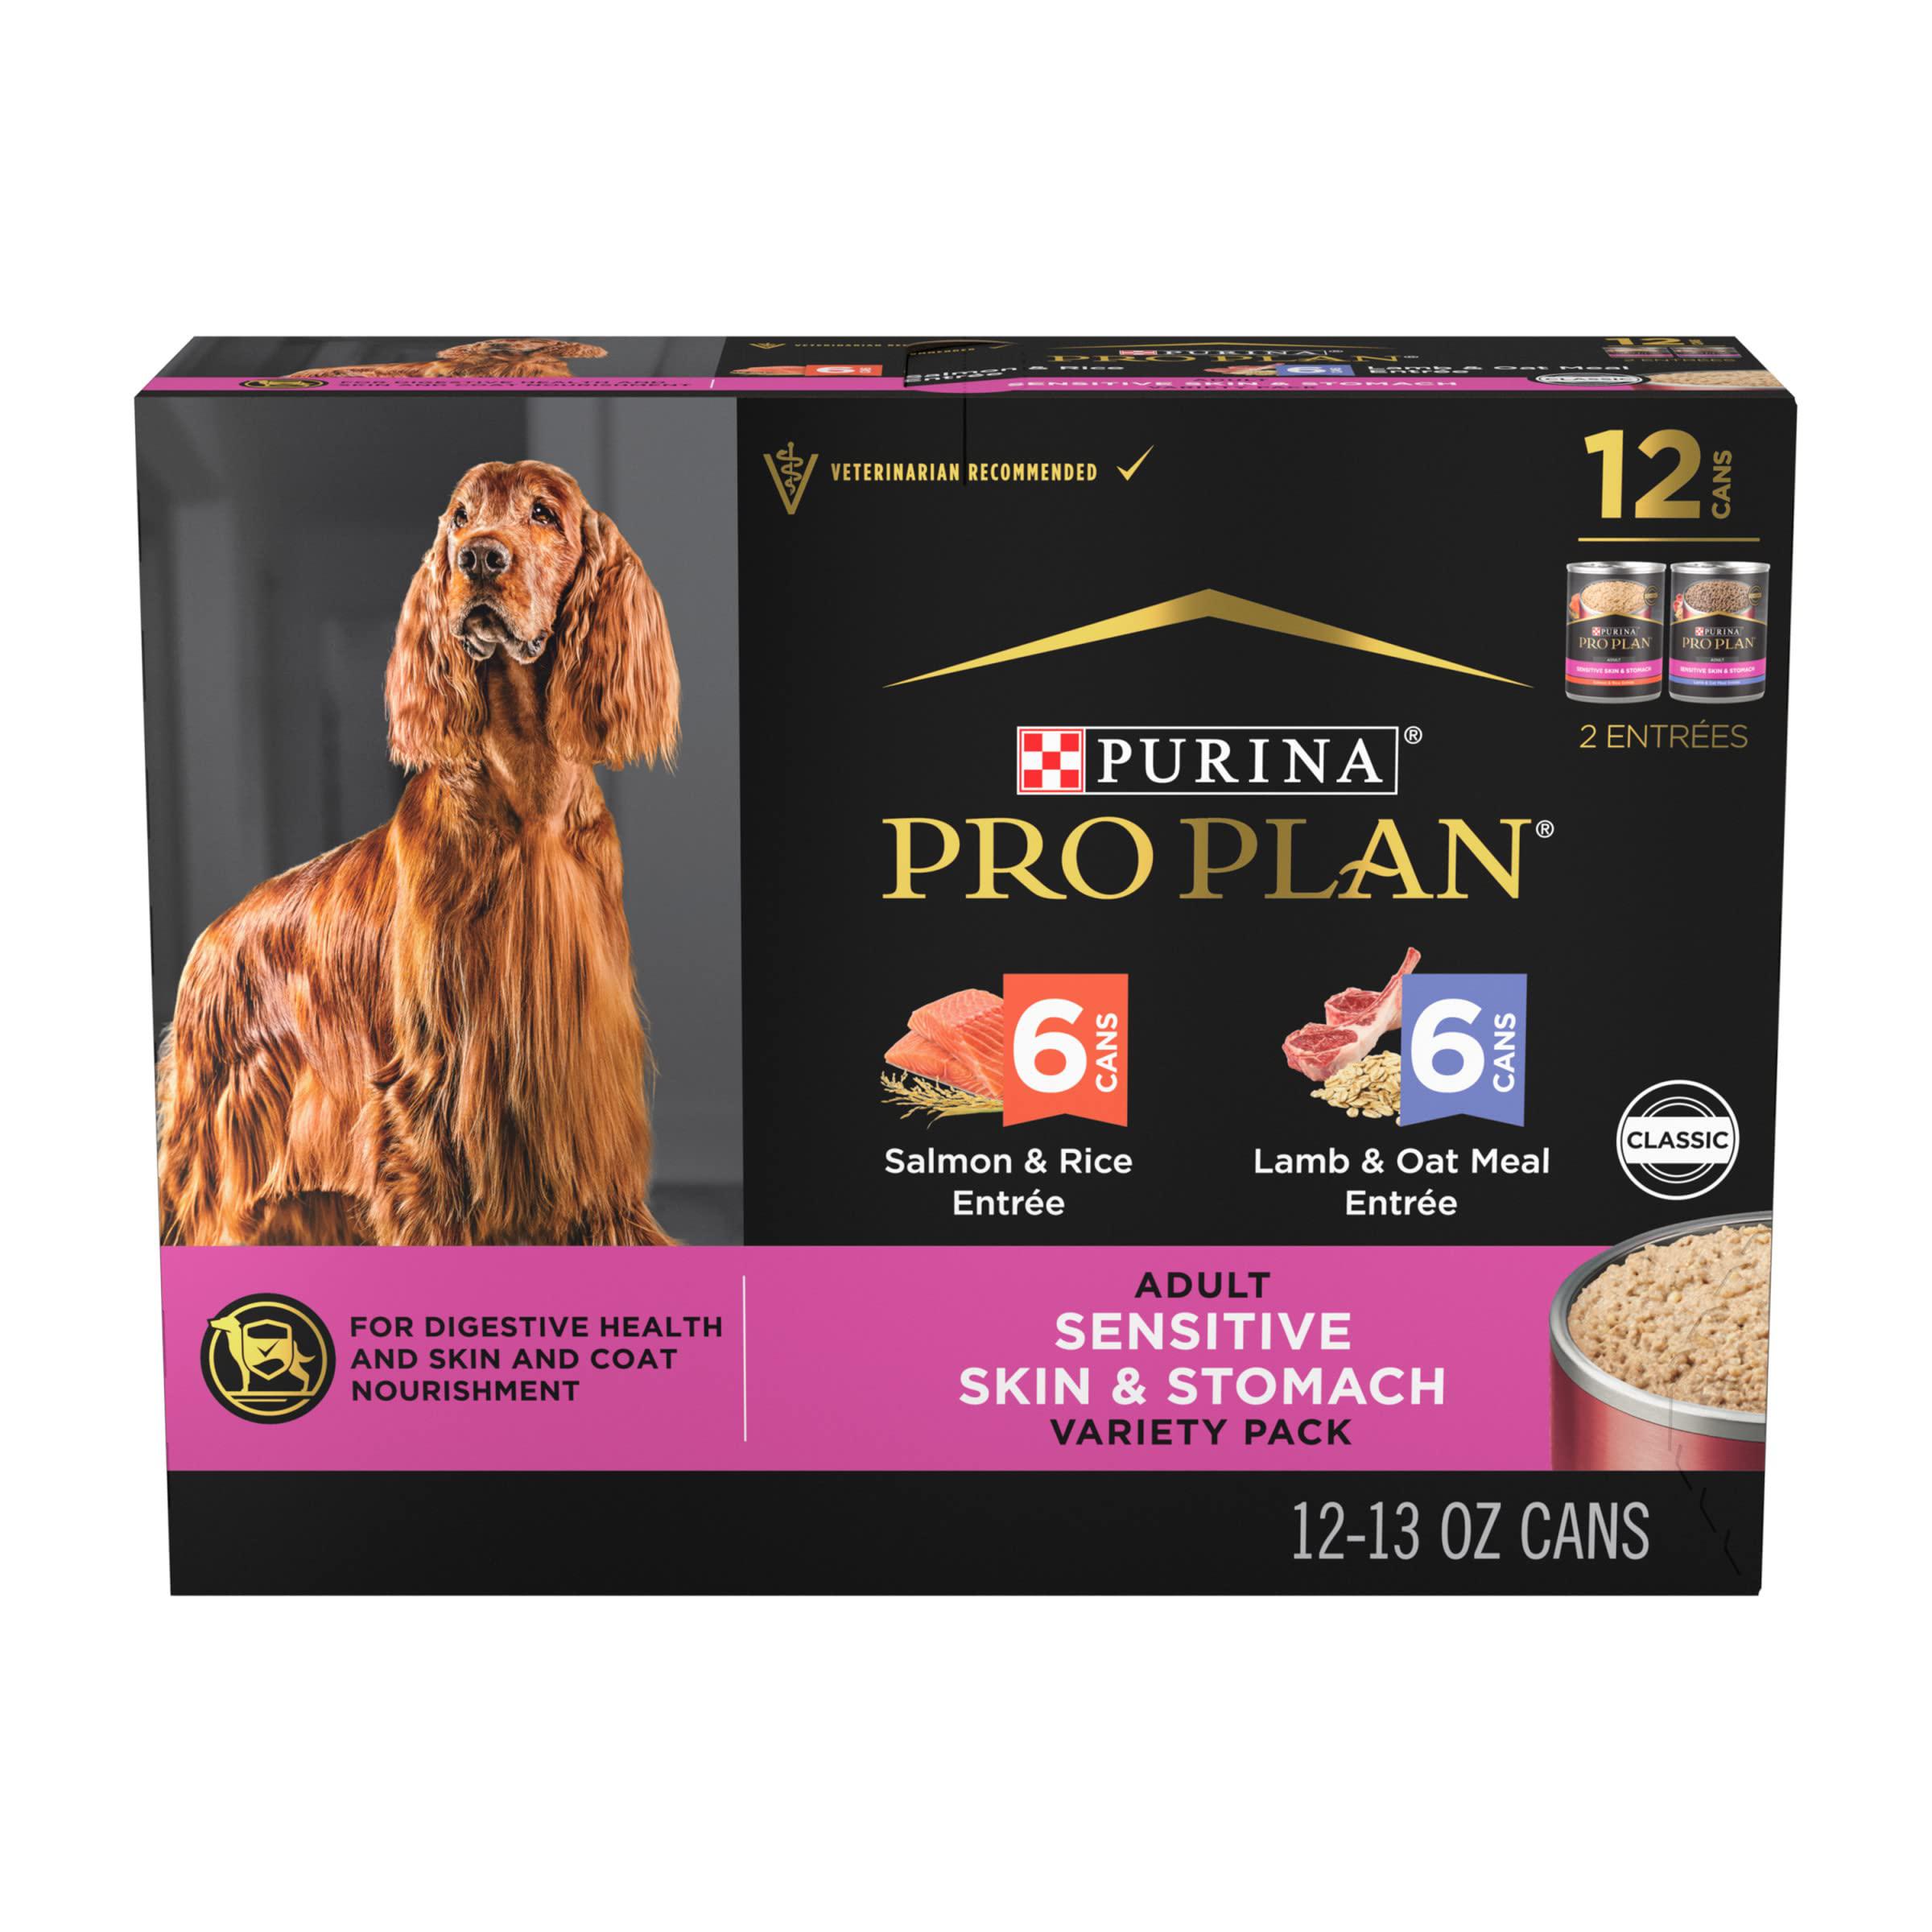 purina pro plan sensitive skin and stomach dog food pate salmon and rice and lamb and oat meal wet dog food variety pack - (1